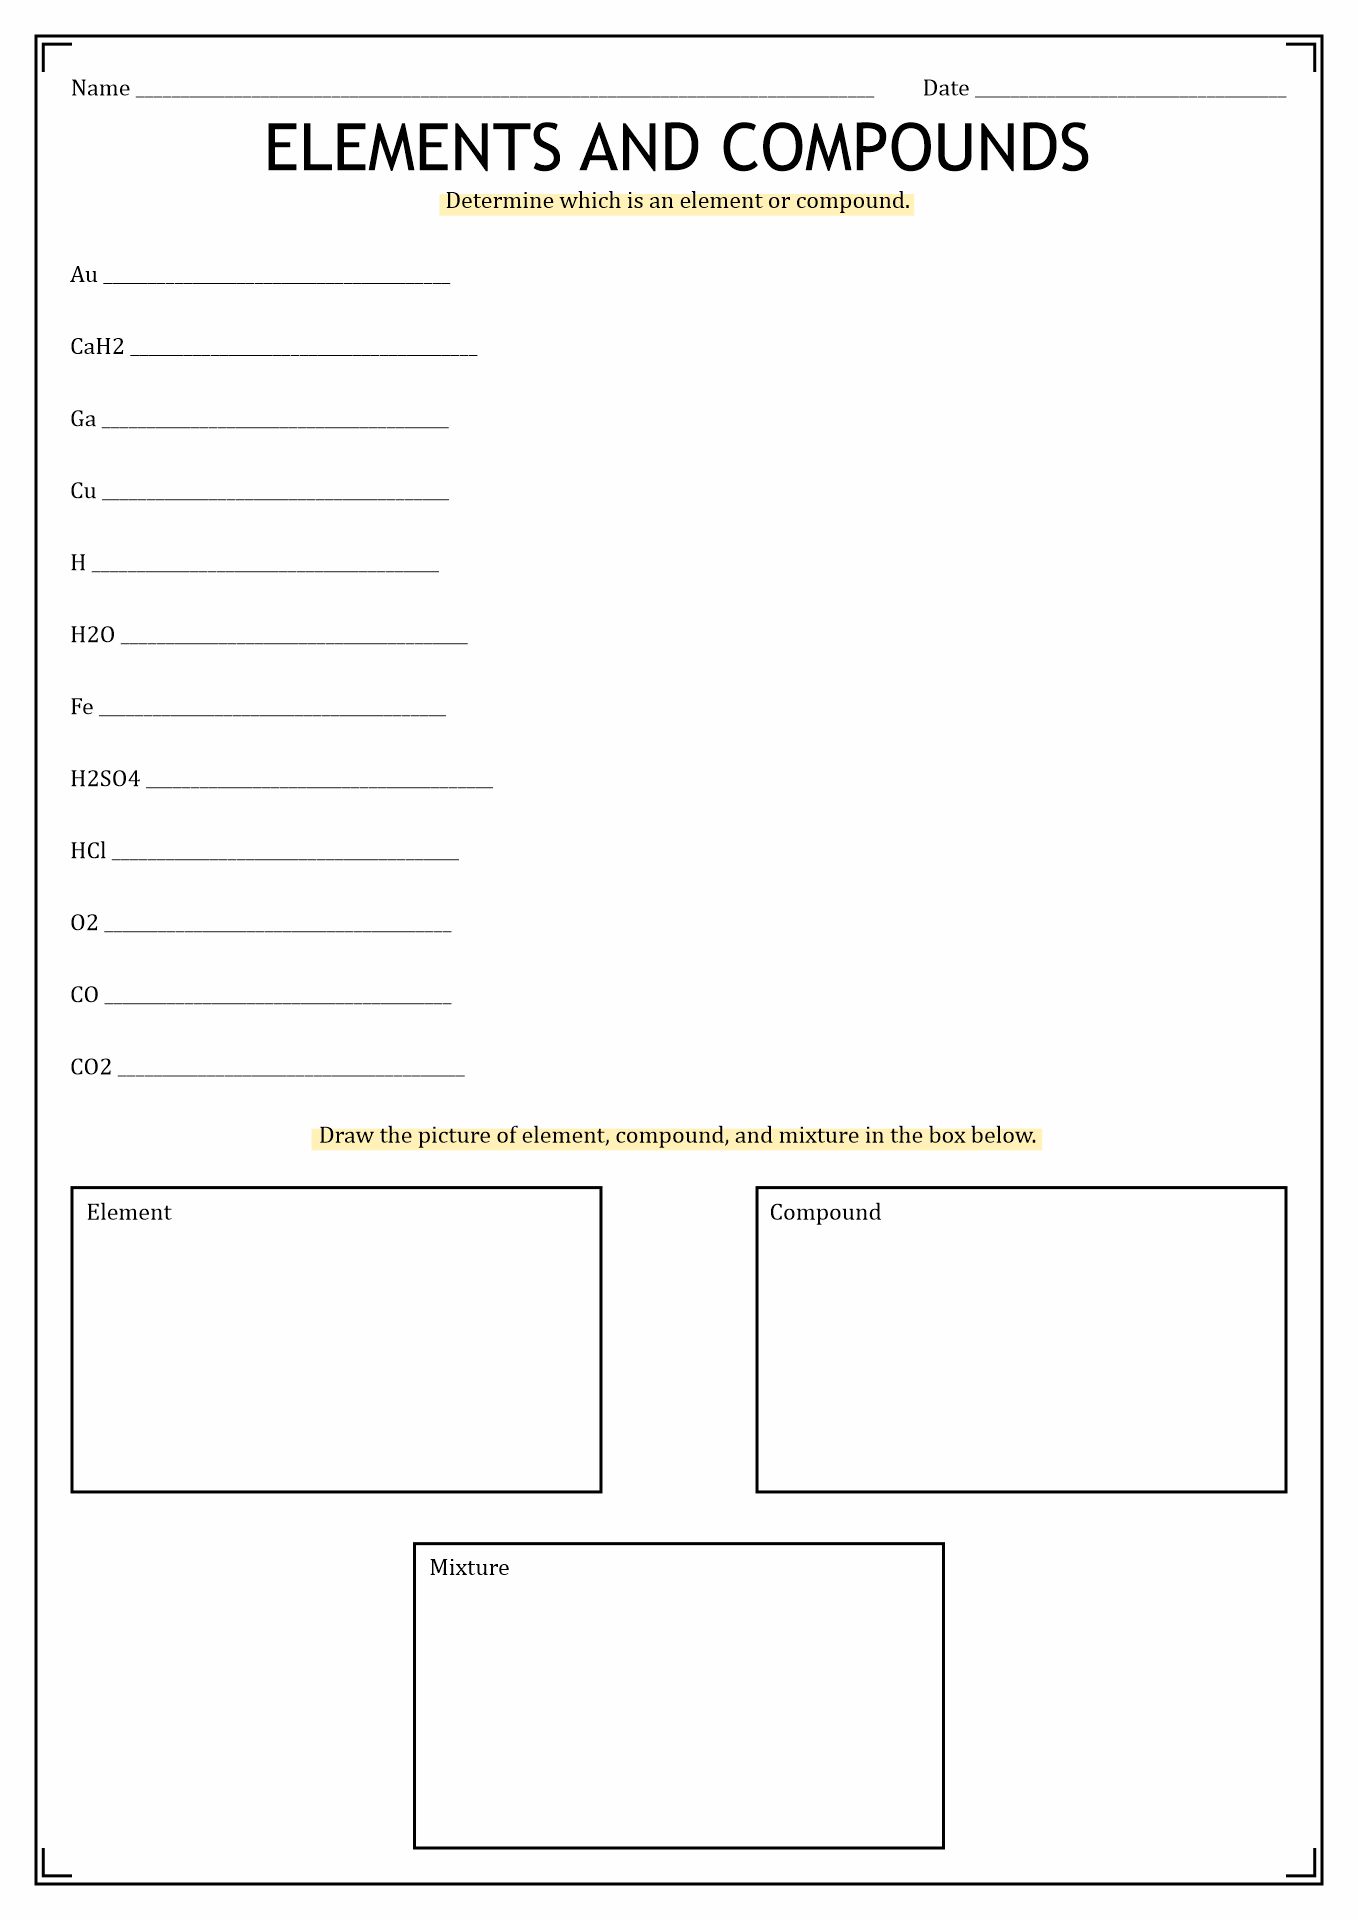 Elements and Compounds Worksheet 6th Grade Image